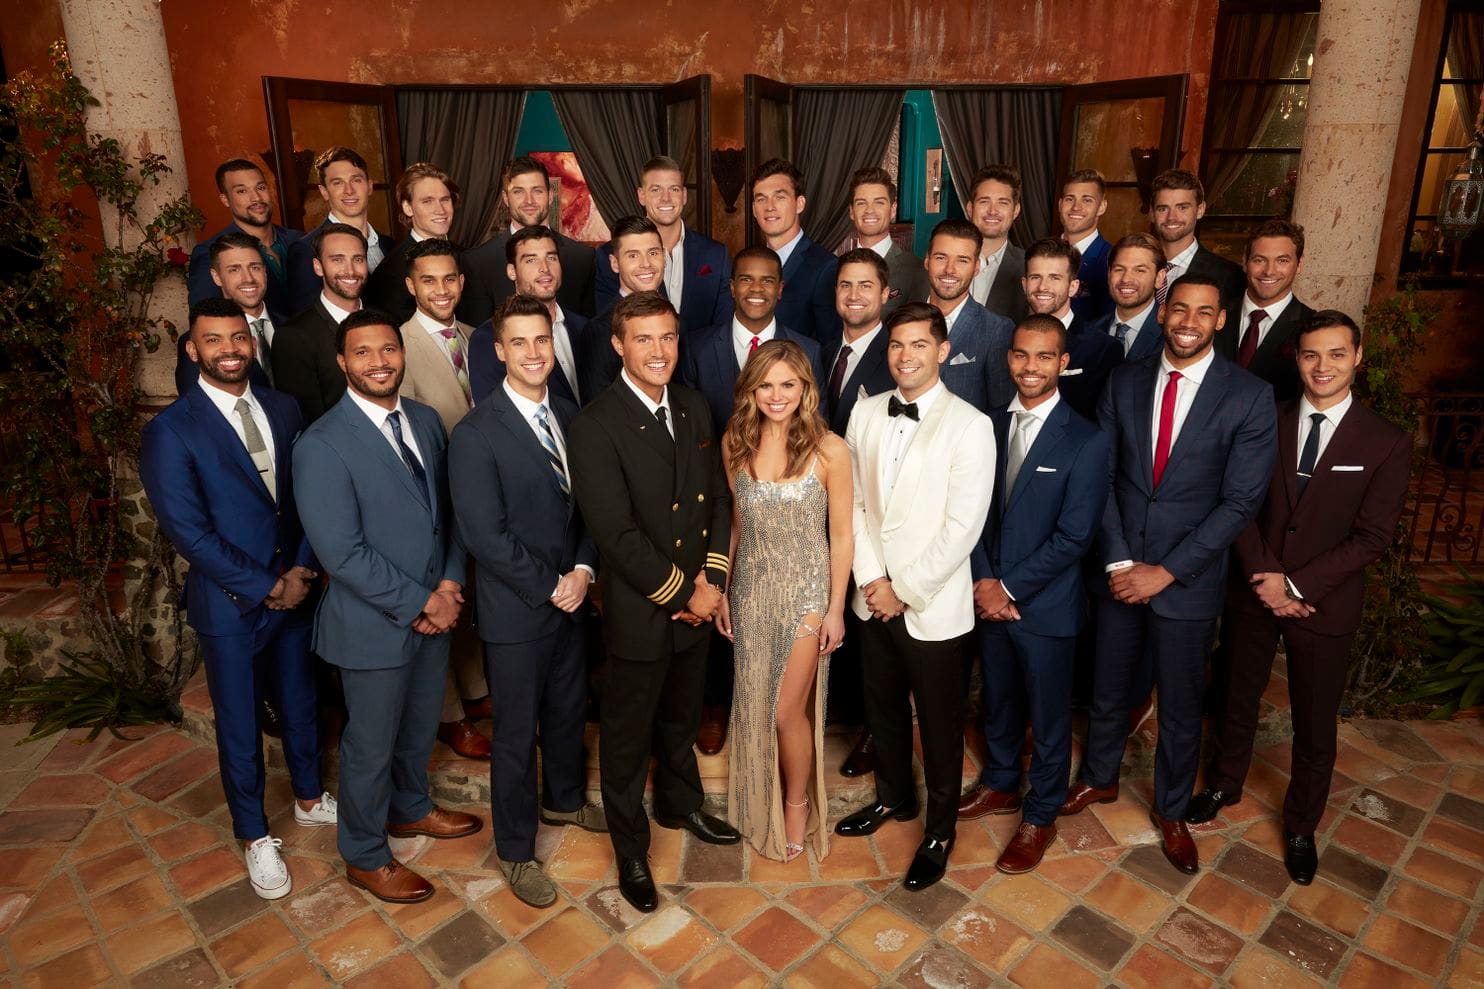 Hey, 'Bachelorette' Fans! Here's A Rundown of All The Black-chelors On The Show